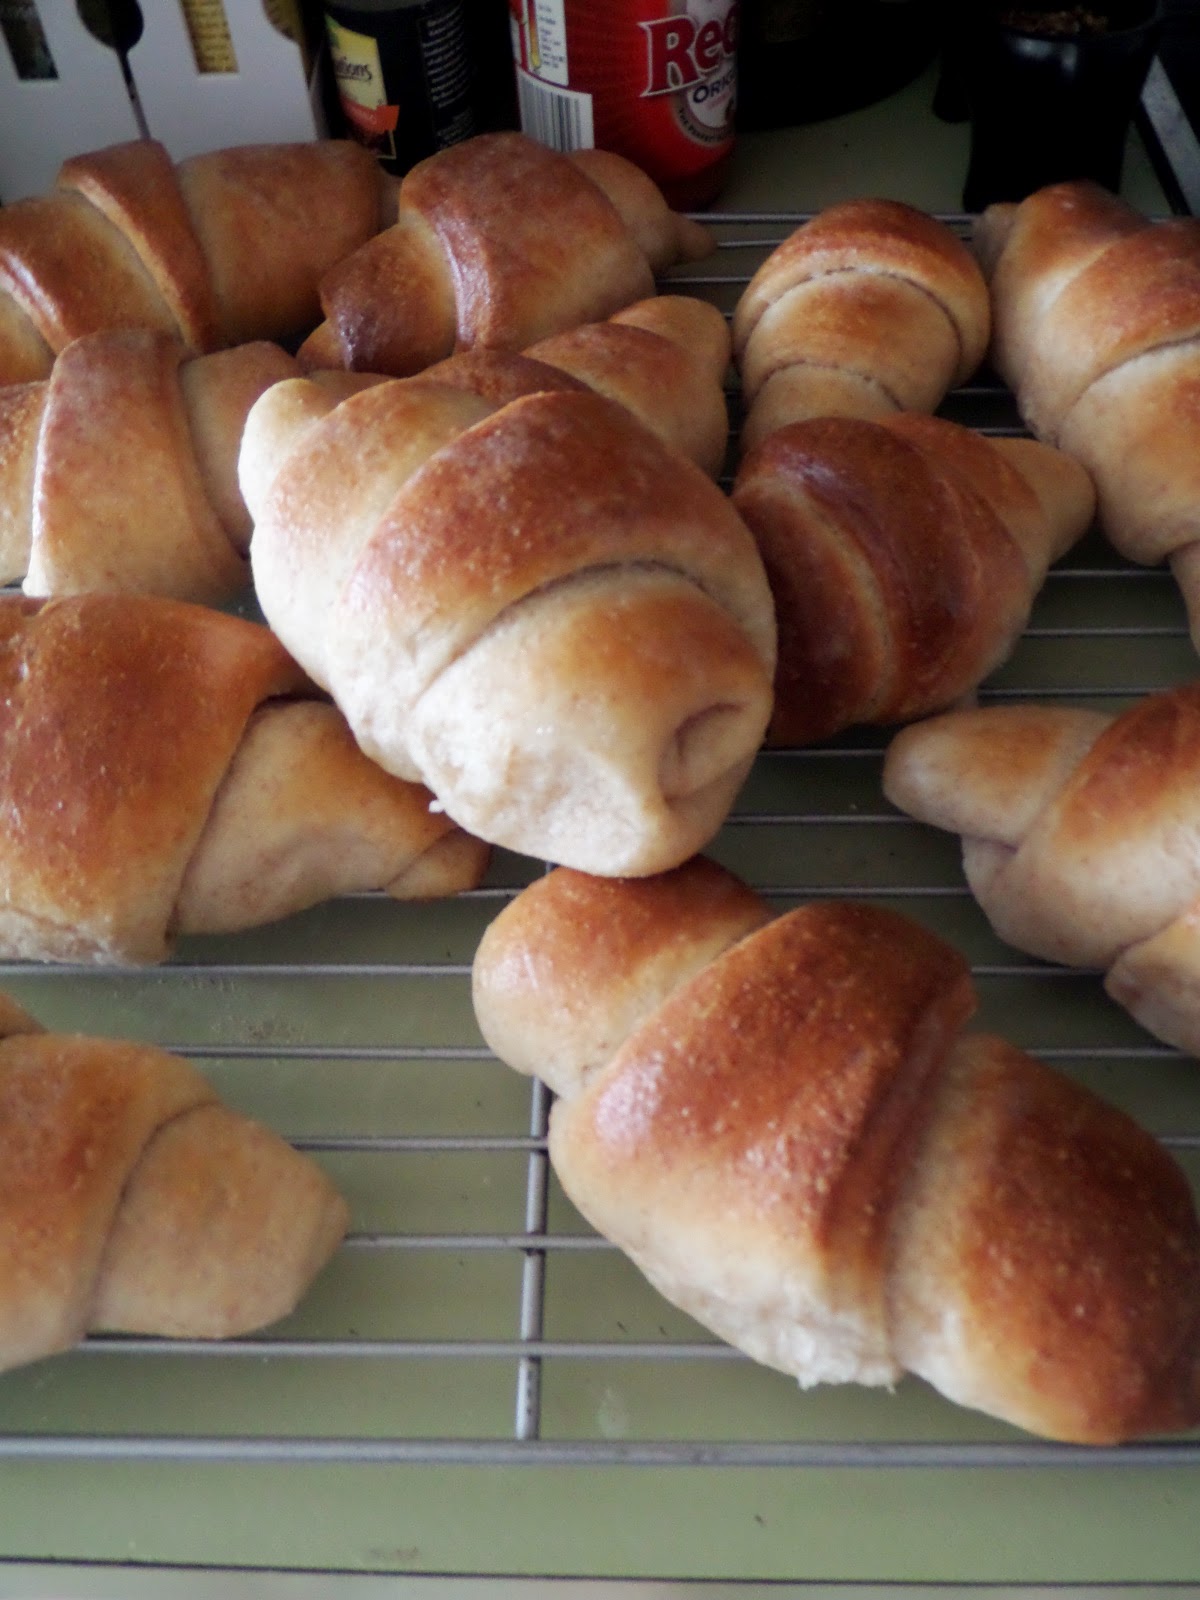 Easy Crescent Rolls:  Soft, yeasty, buttery rolls rolled into crescent shapes.  They make great dinner rolls, sandwich rolls, or snacks.